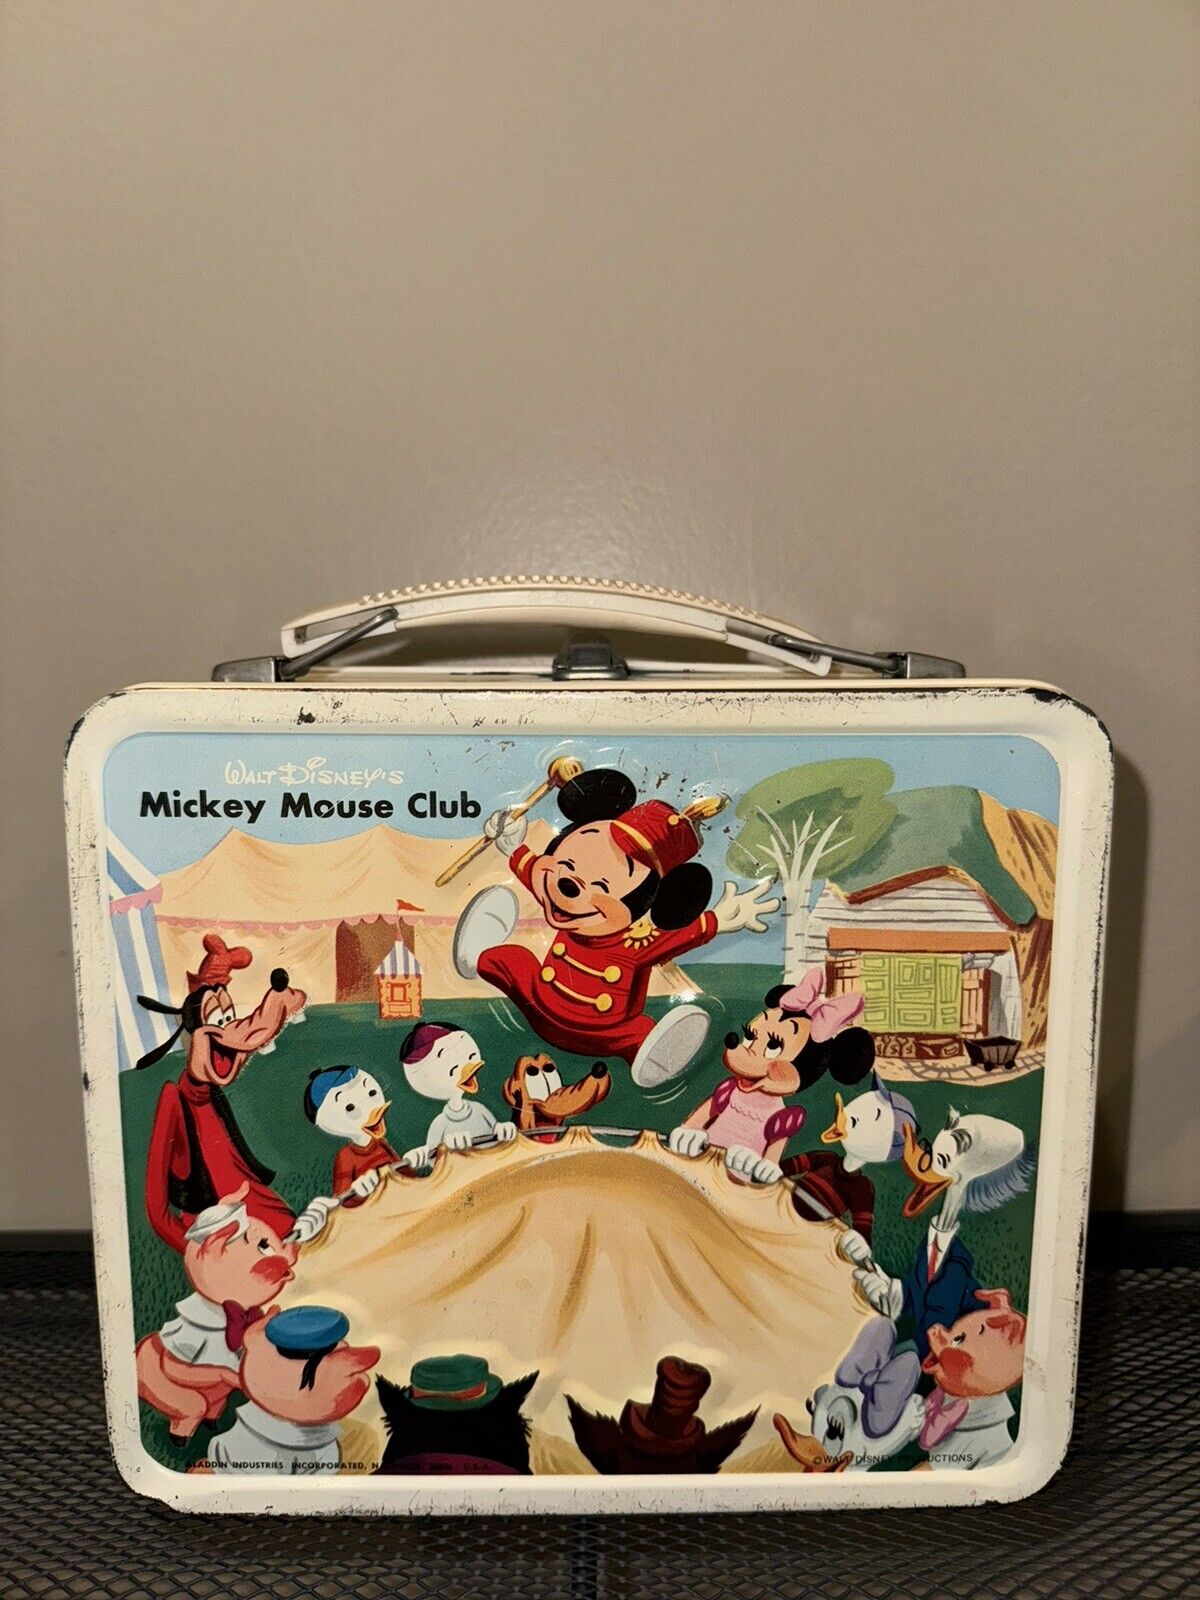 Vintage 1960s - Walt Disney Mickey Mouse Club Metal Lunchbox - GREAT CONDITION